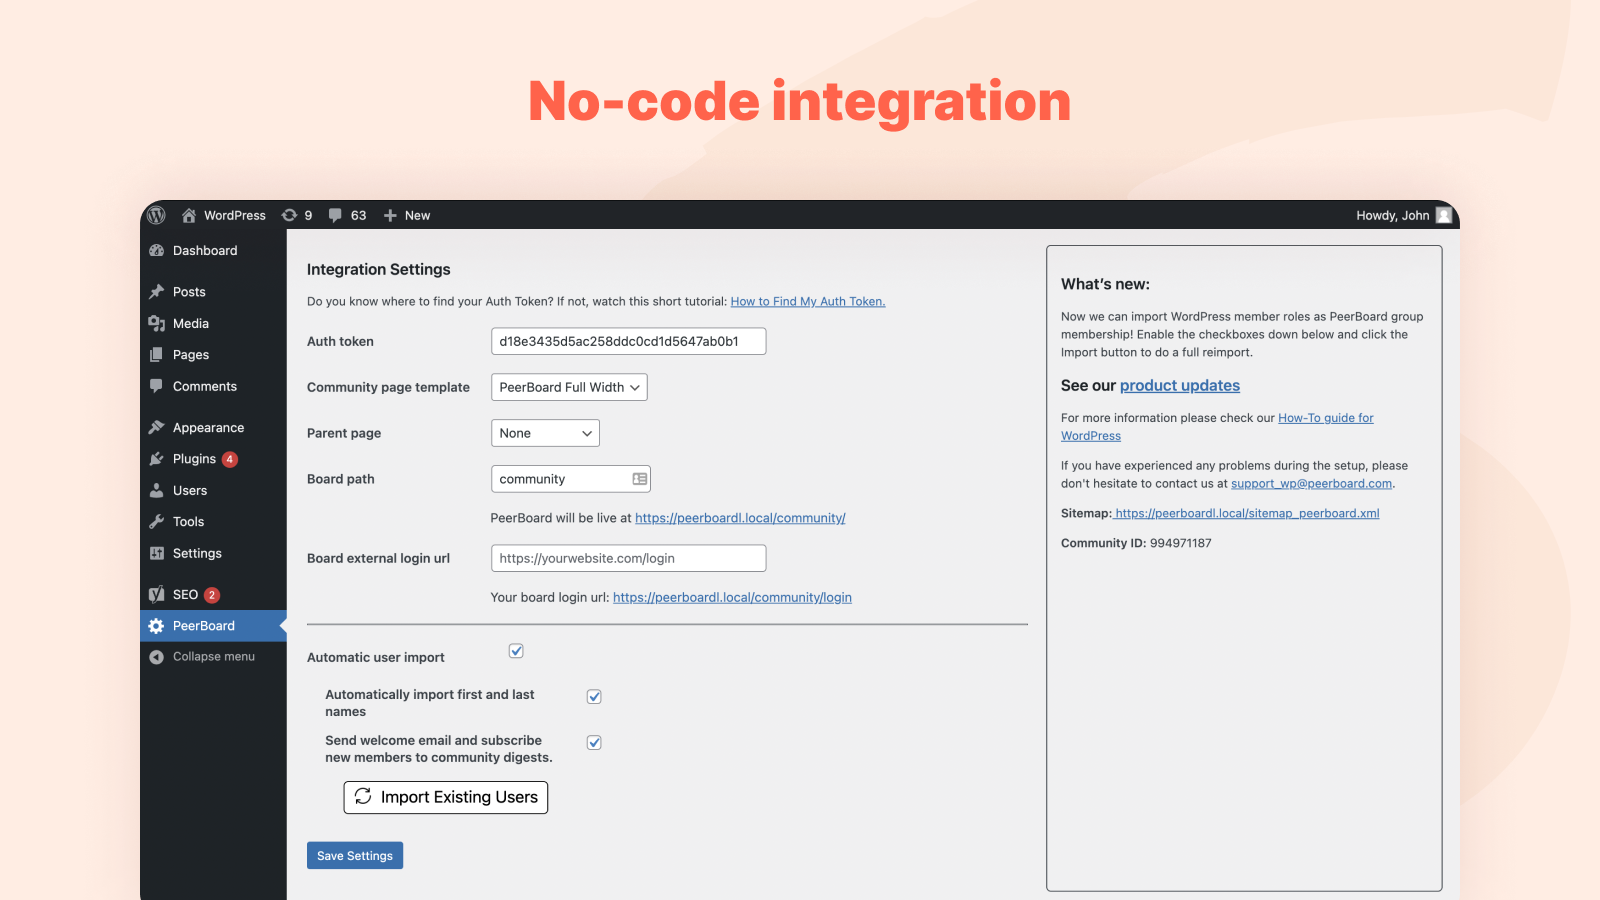 No-code integration. Embed PeerBoard as a fully customizable page in your WordPress configuration in 10 minutes.